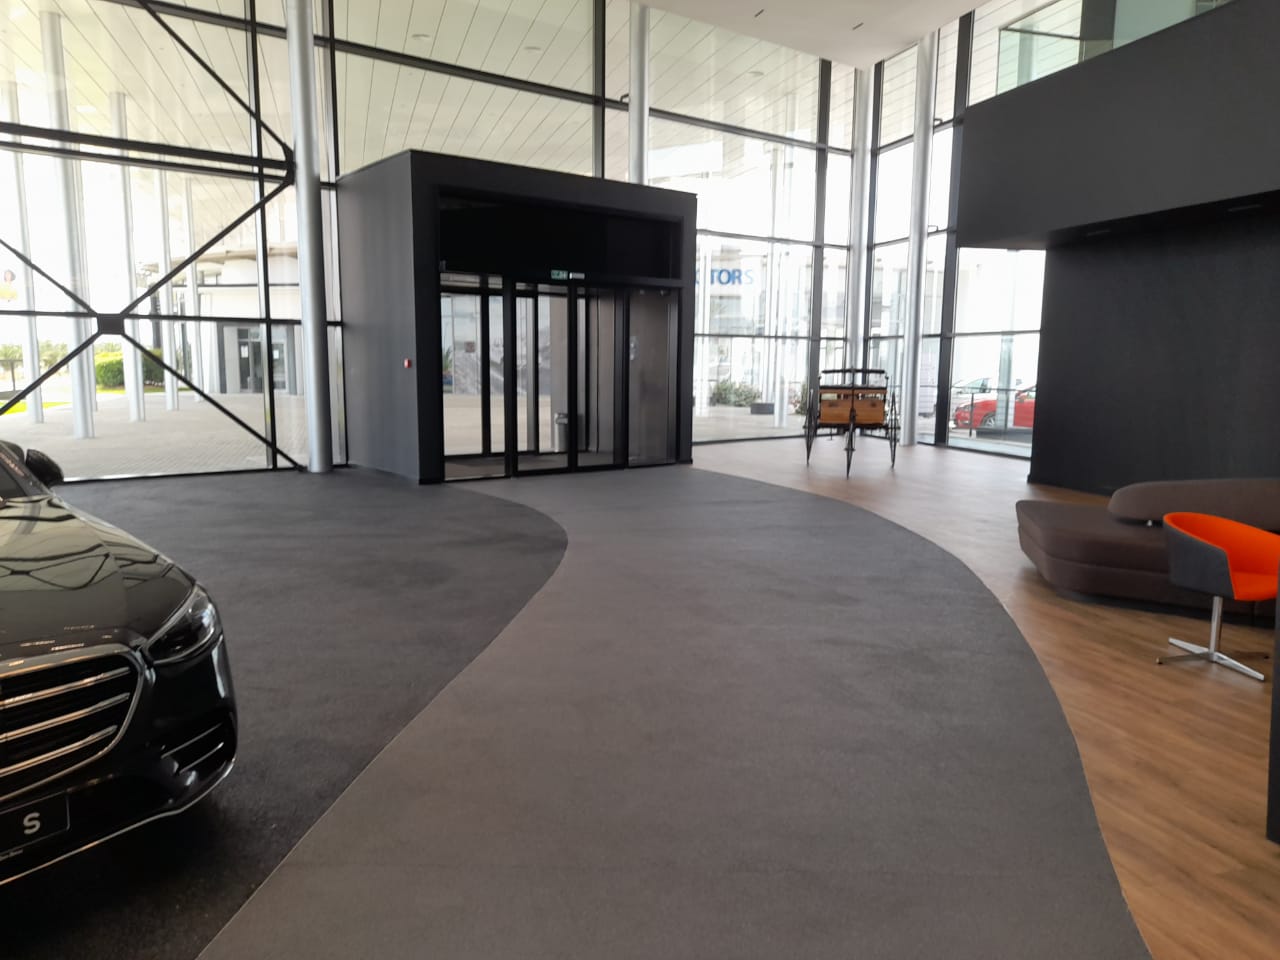 MERCEDES SHOWROOMWhatsApp Image 2021-05-27 at 14.56.09 (1)